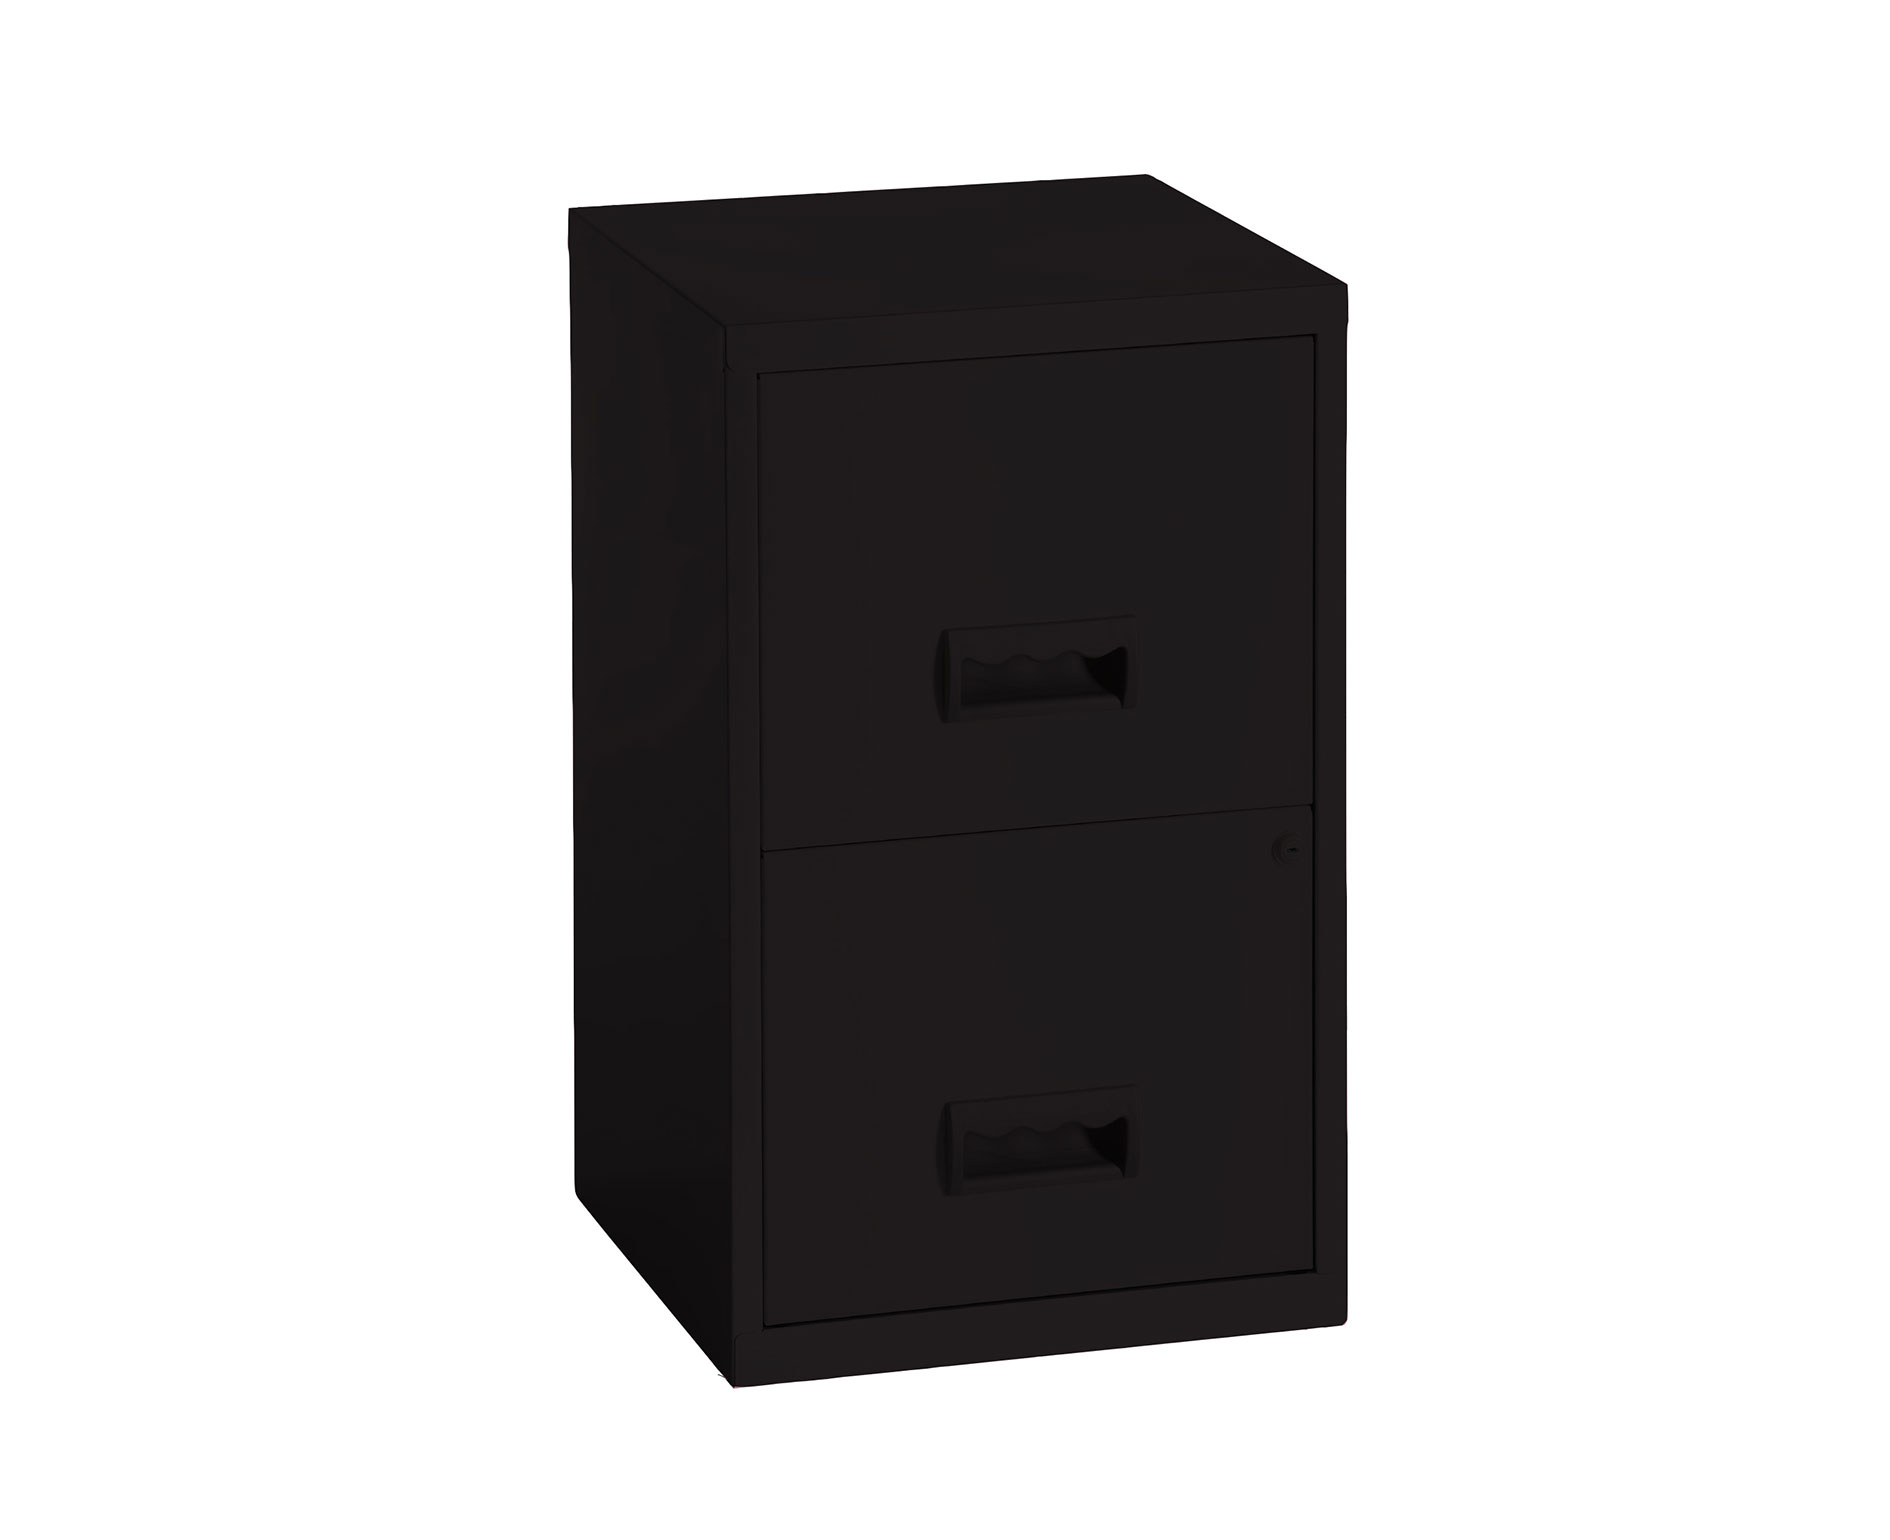 Black Filing Cabinets Storage Shelving Furniture Storage Ryman intended for size 1890 X 1540